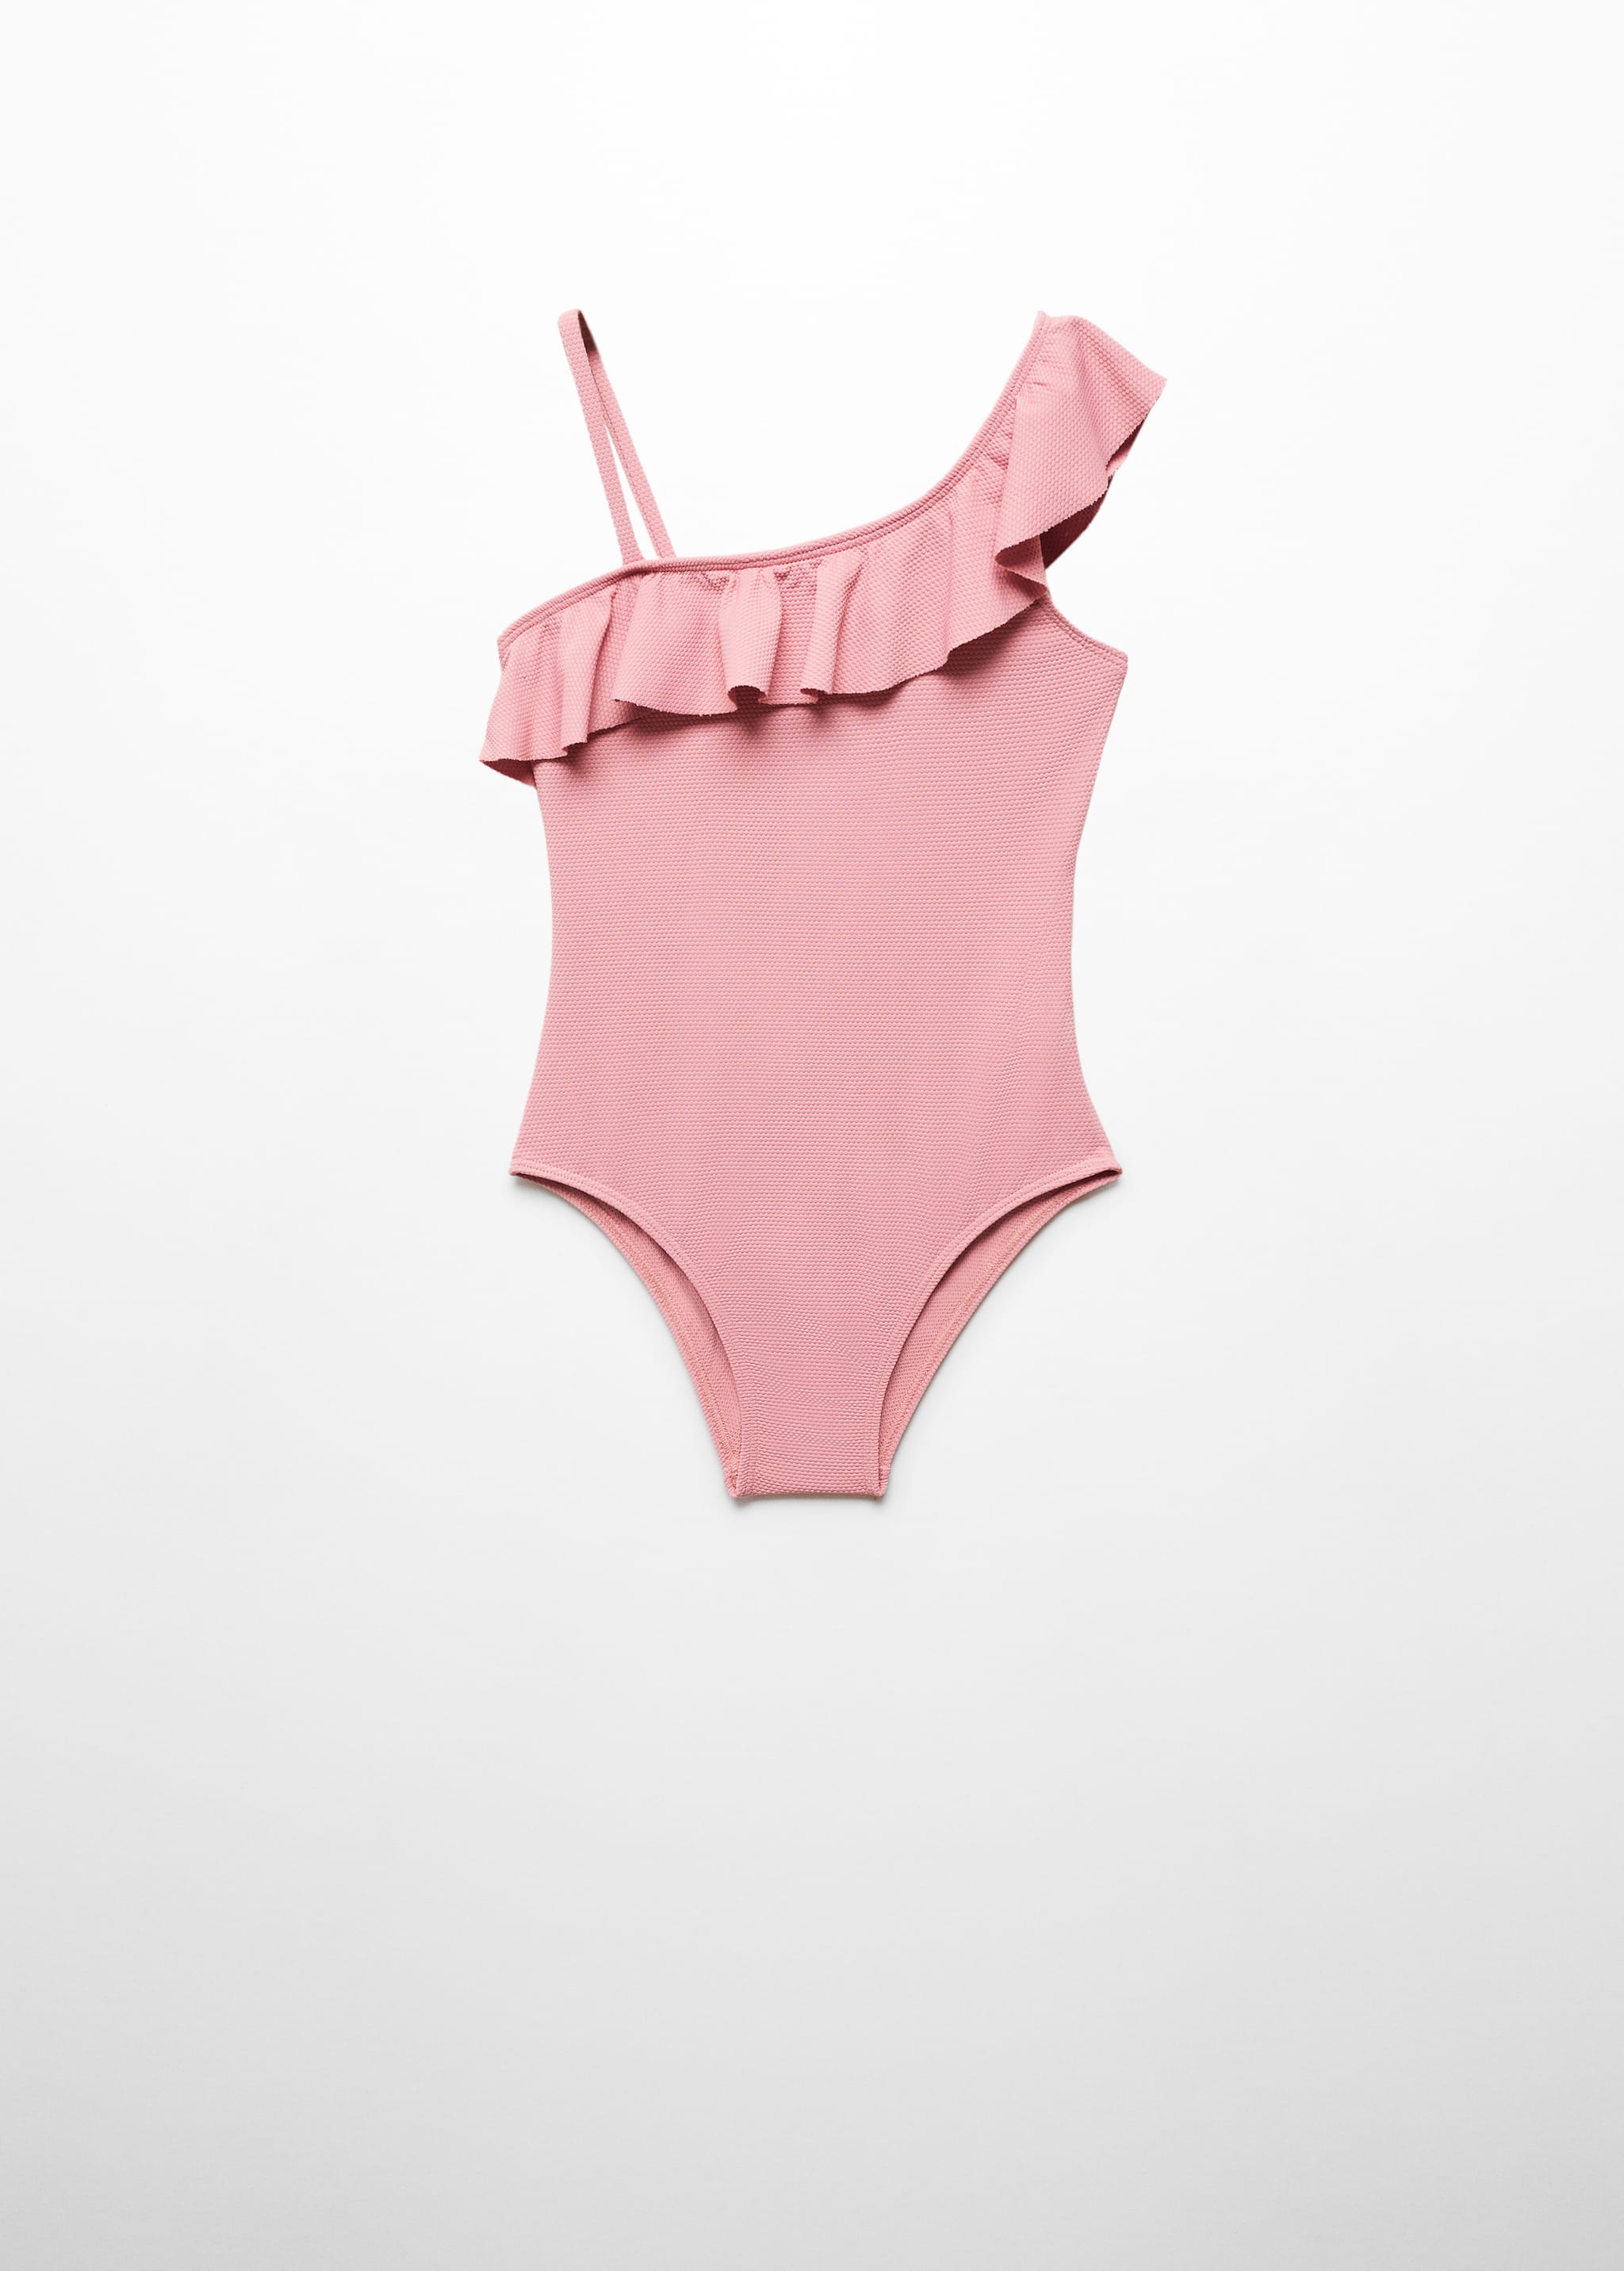 Asymmetric ruffle swimsuit - Article without model